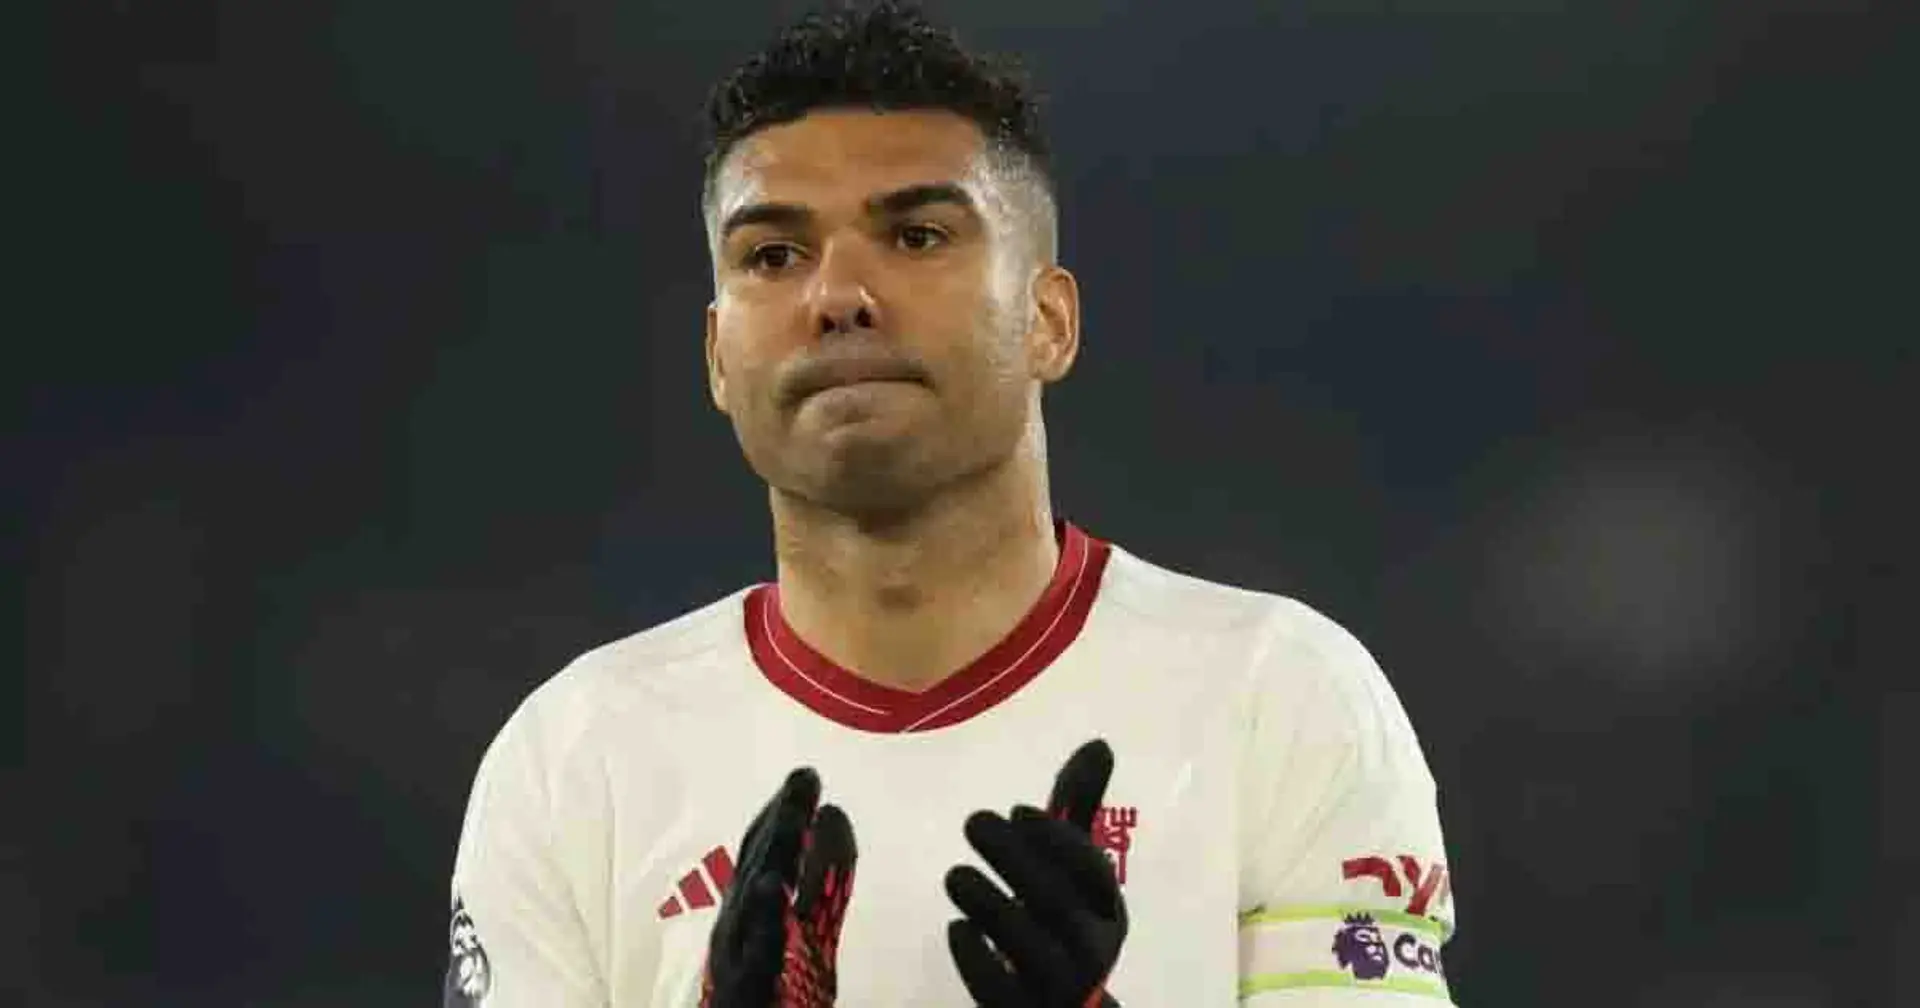 Man United's plan for Casemiro after Crystal Palace nightmare revealed (reliability: 5 stars)